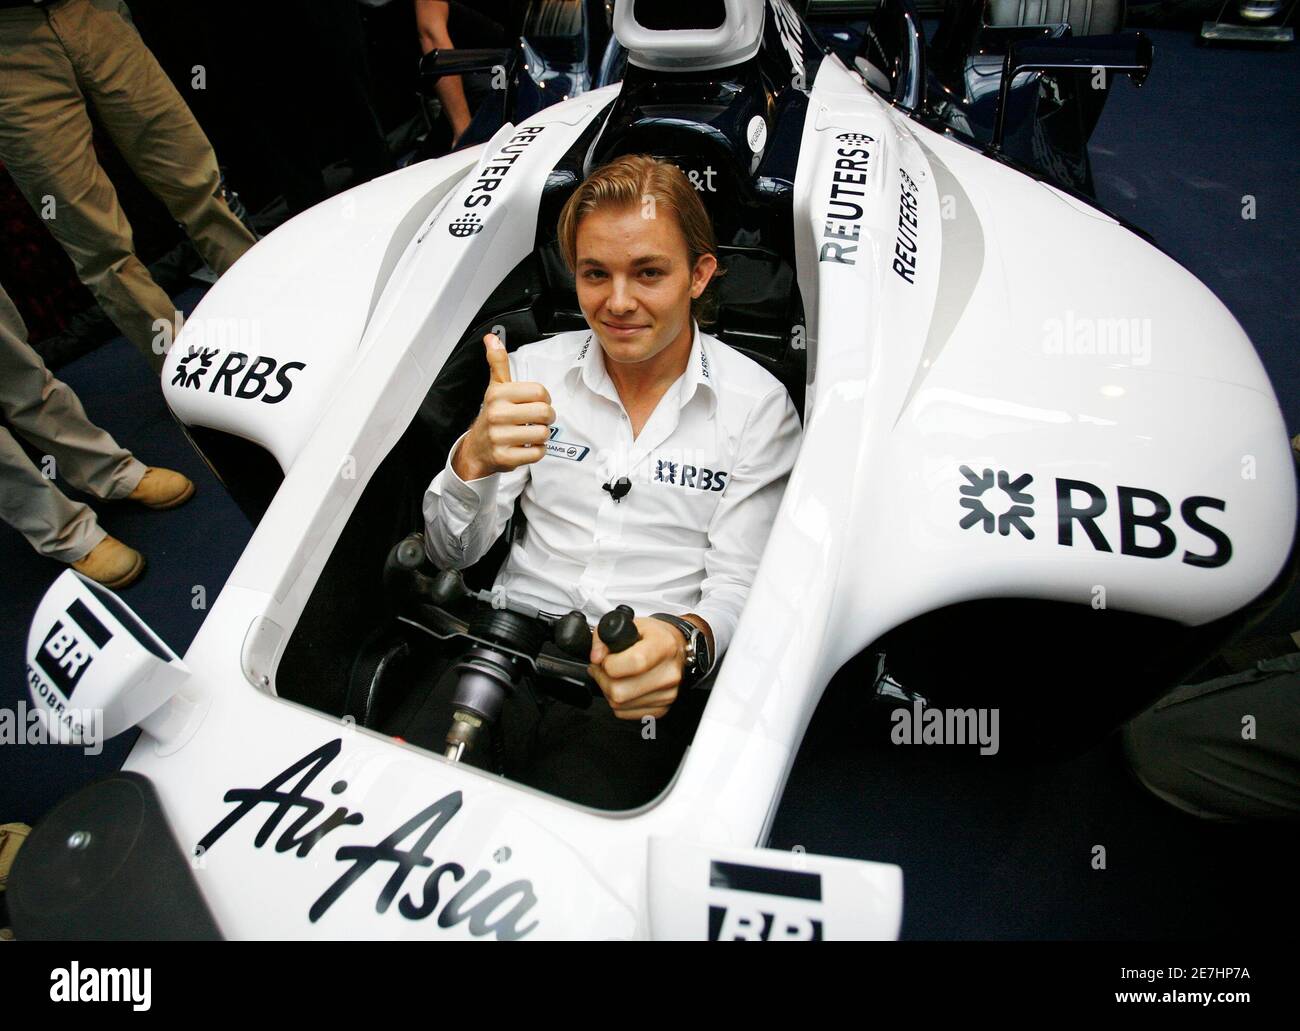 Williams Formula One driver Nico Rosberg of Germany gestures after getting into an F1 simulator in Singapore March 18, 2008.  REUTERS/Vivek Prakash (SINGAPORE) Stock Photo